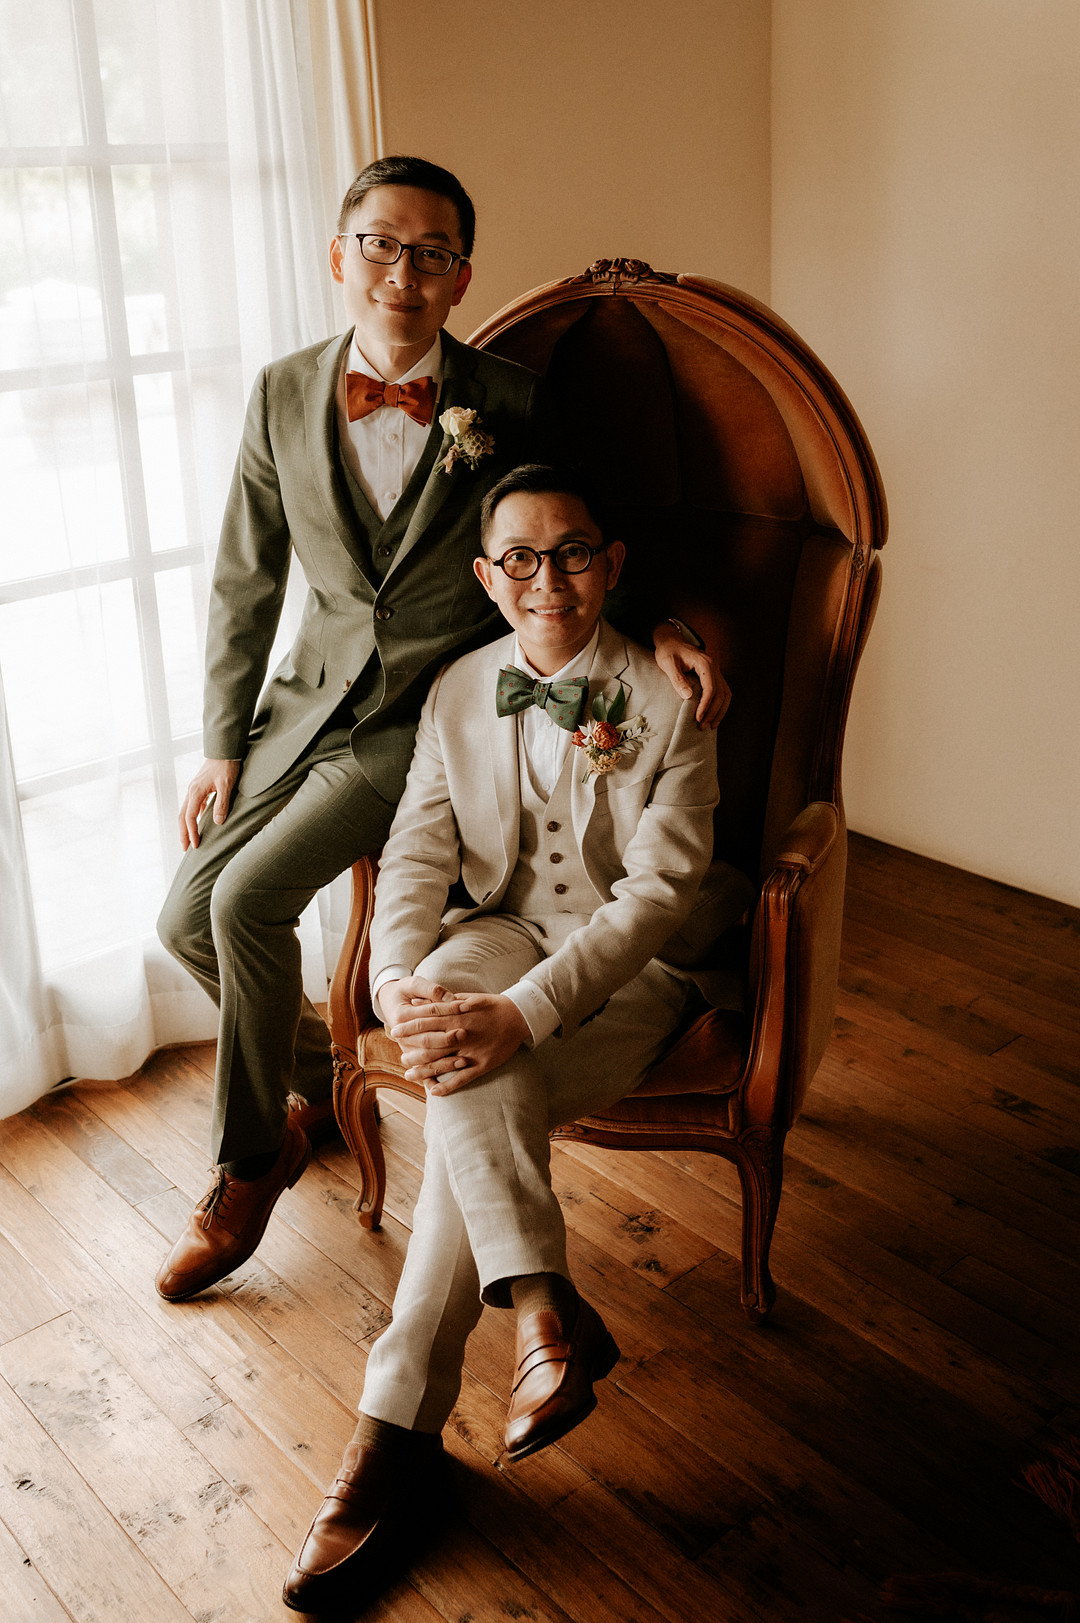 An Asian man in a tan suit and green bow tie sits in an orange chair while another Asian man in an olive green suit with an orange bow tie sits on the arm of the chair. They are both wearing glasses and are smiling at the camera.It's their wedding day!